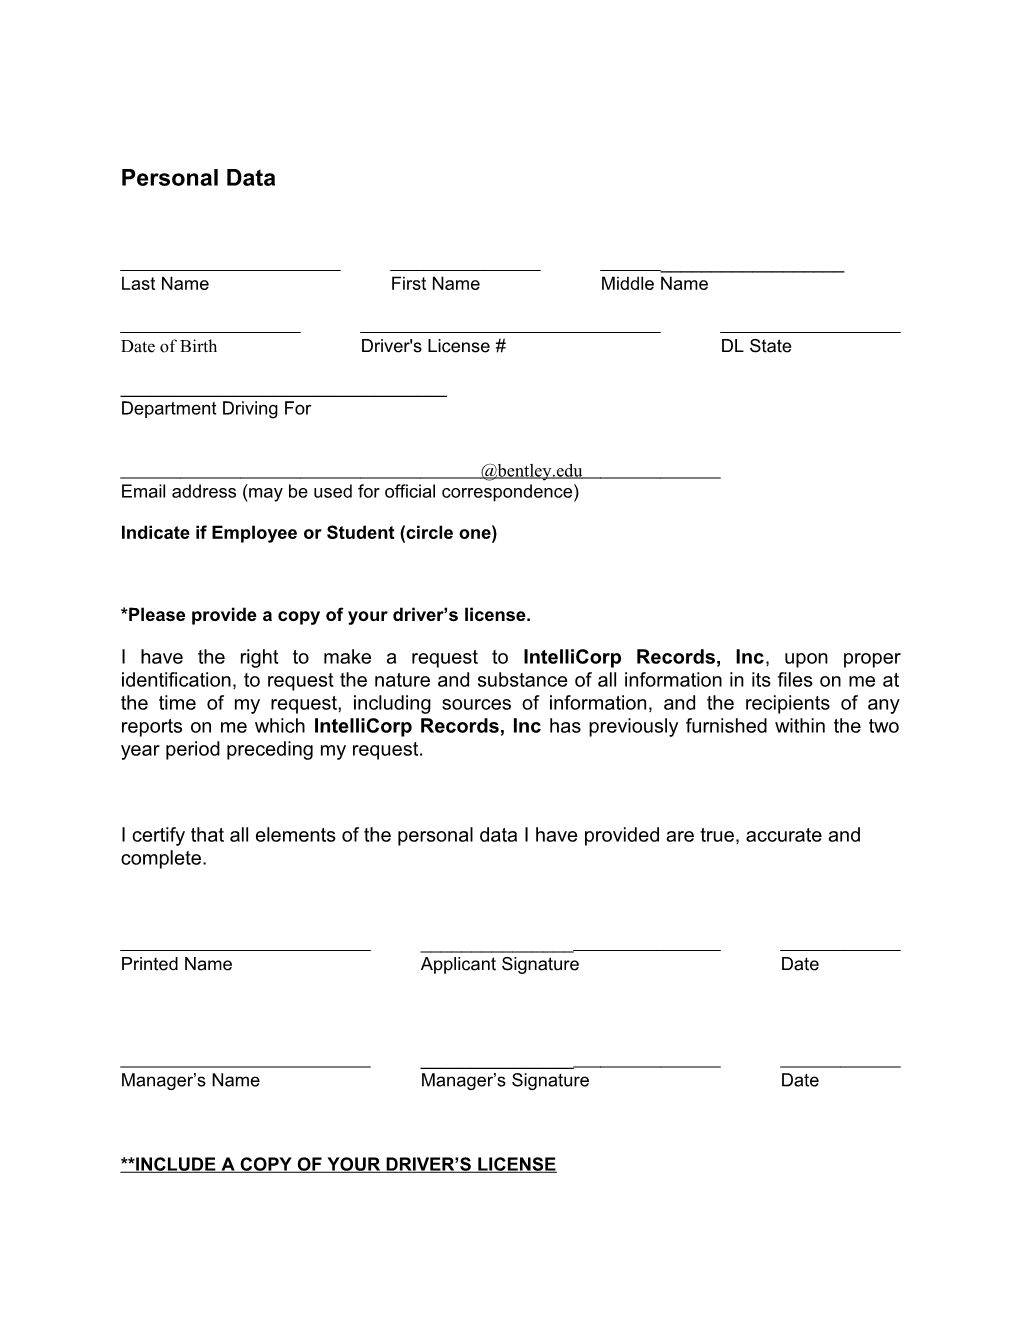 Disclosure Form to Obtain Consumer Reports for Employment Purposes